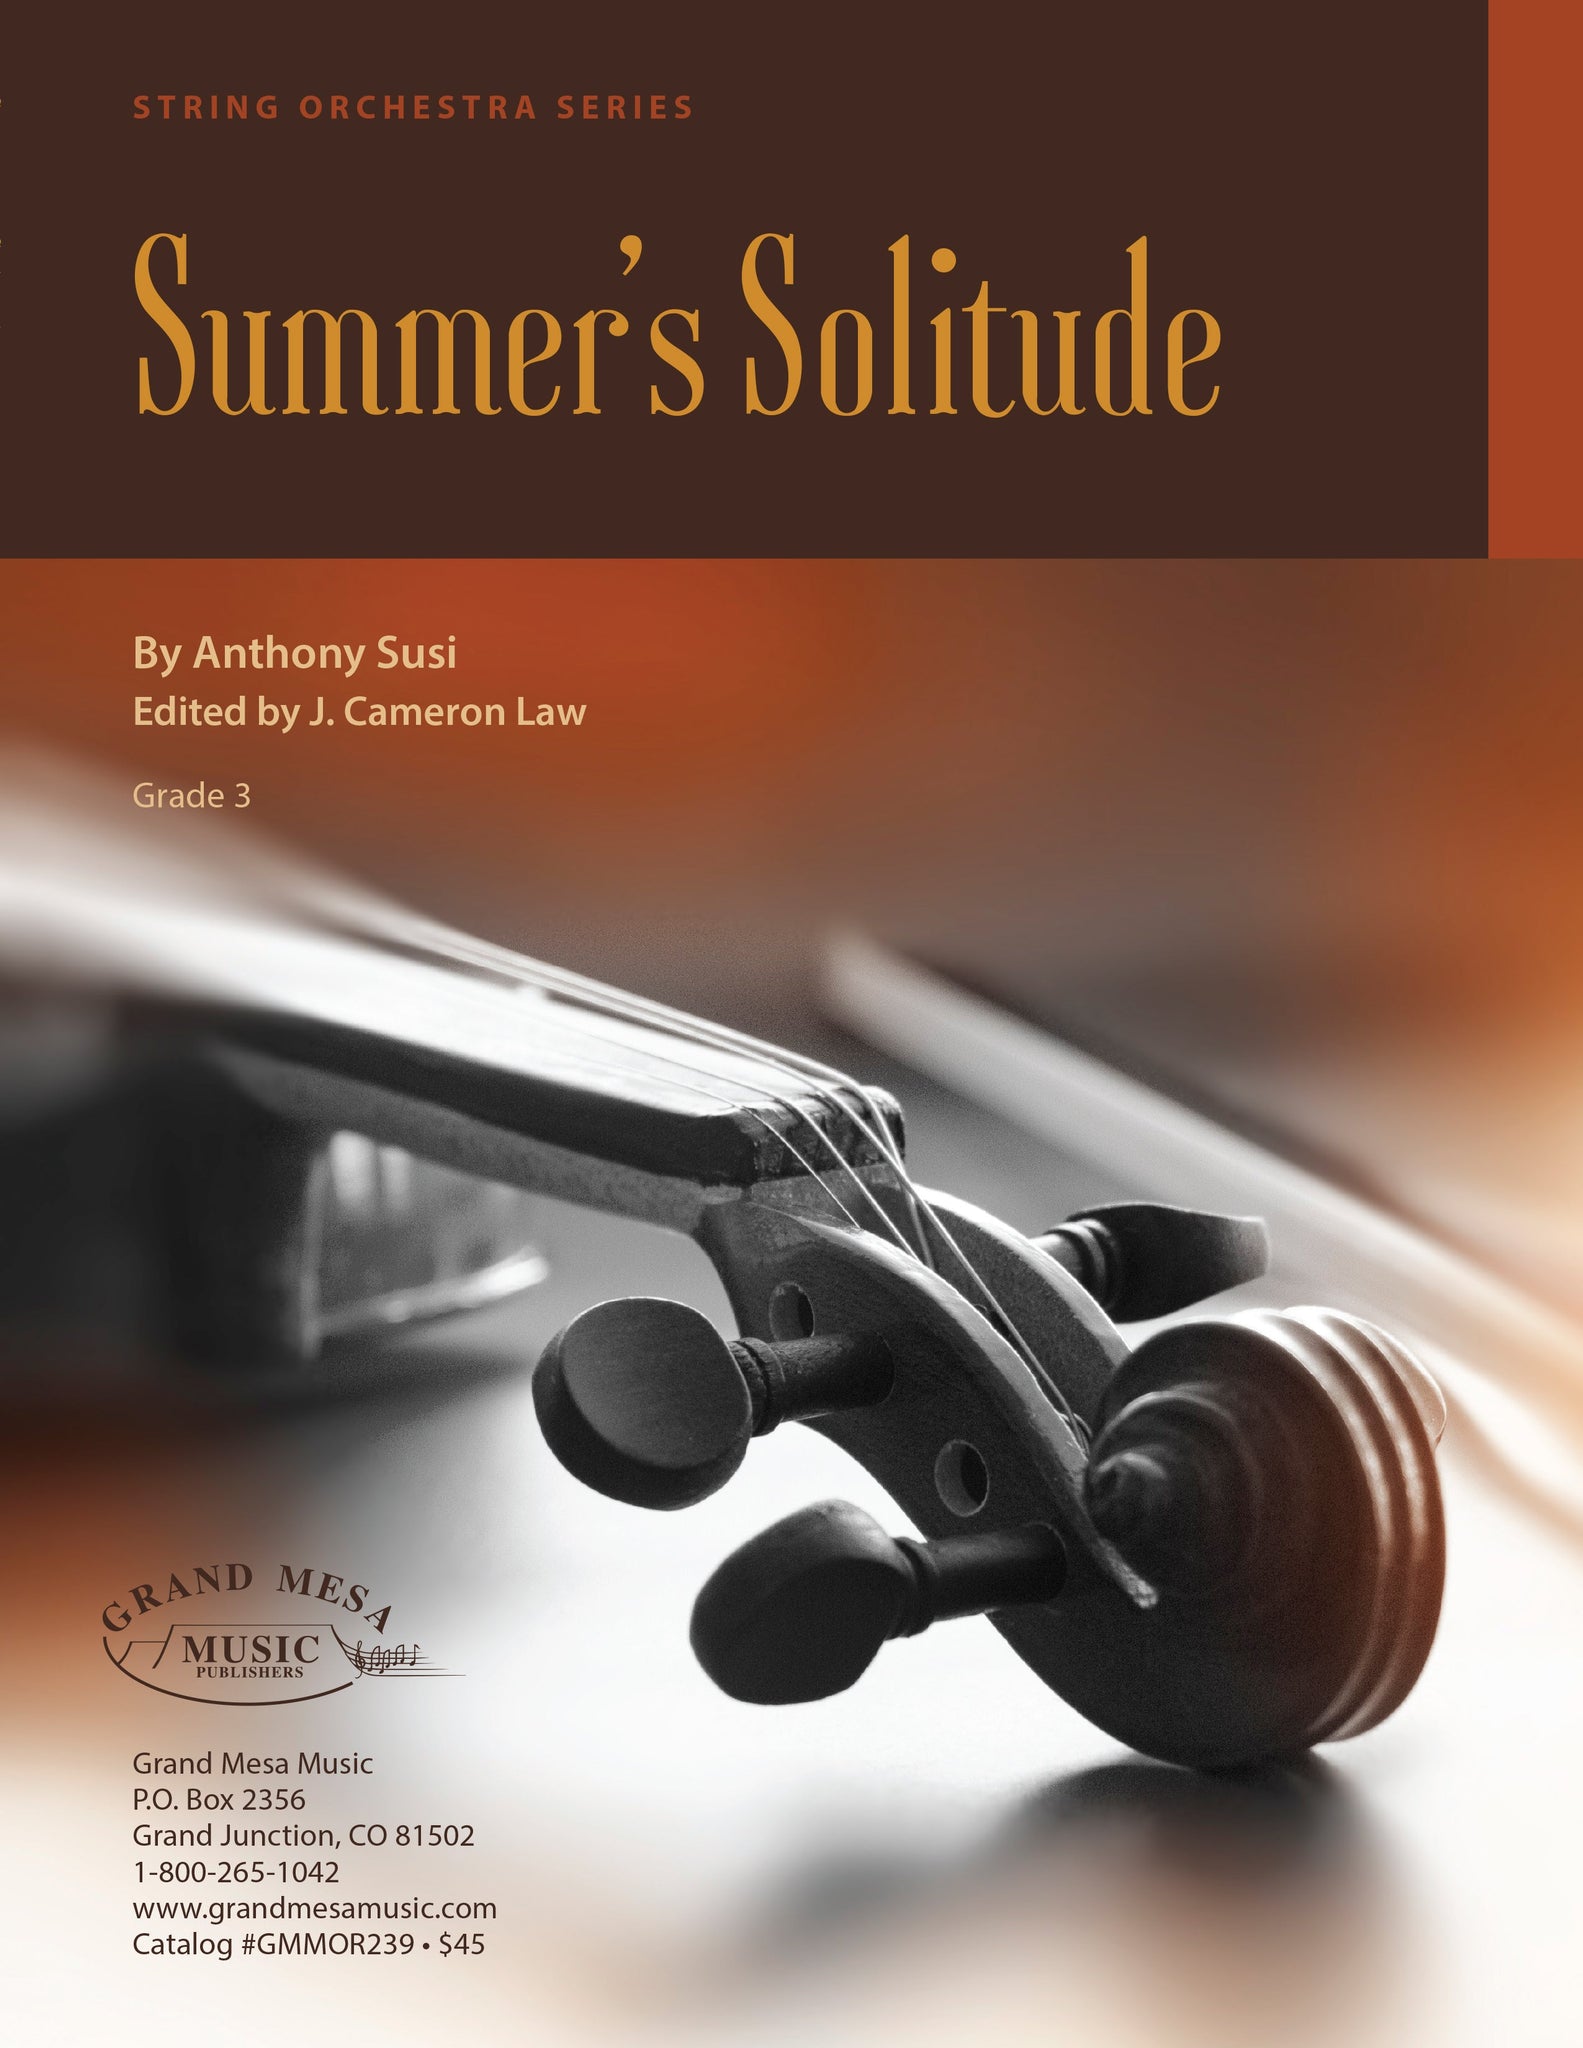 Strings sheet music cover of Summer's Solitude, composed by Anthony Susi.